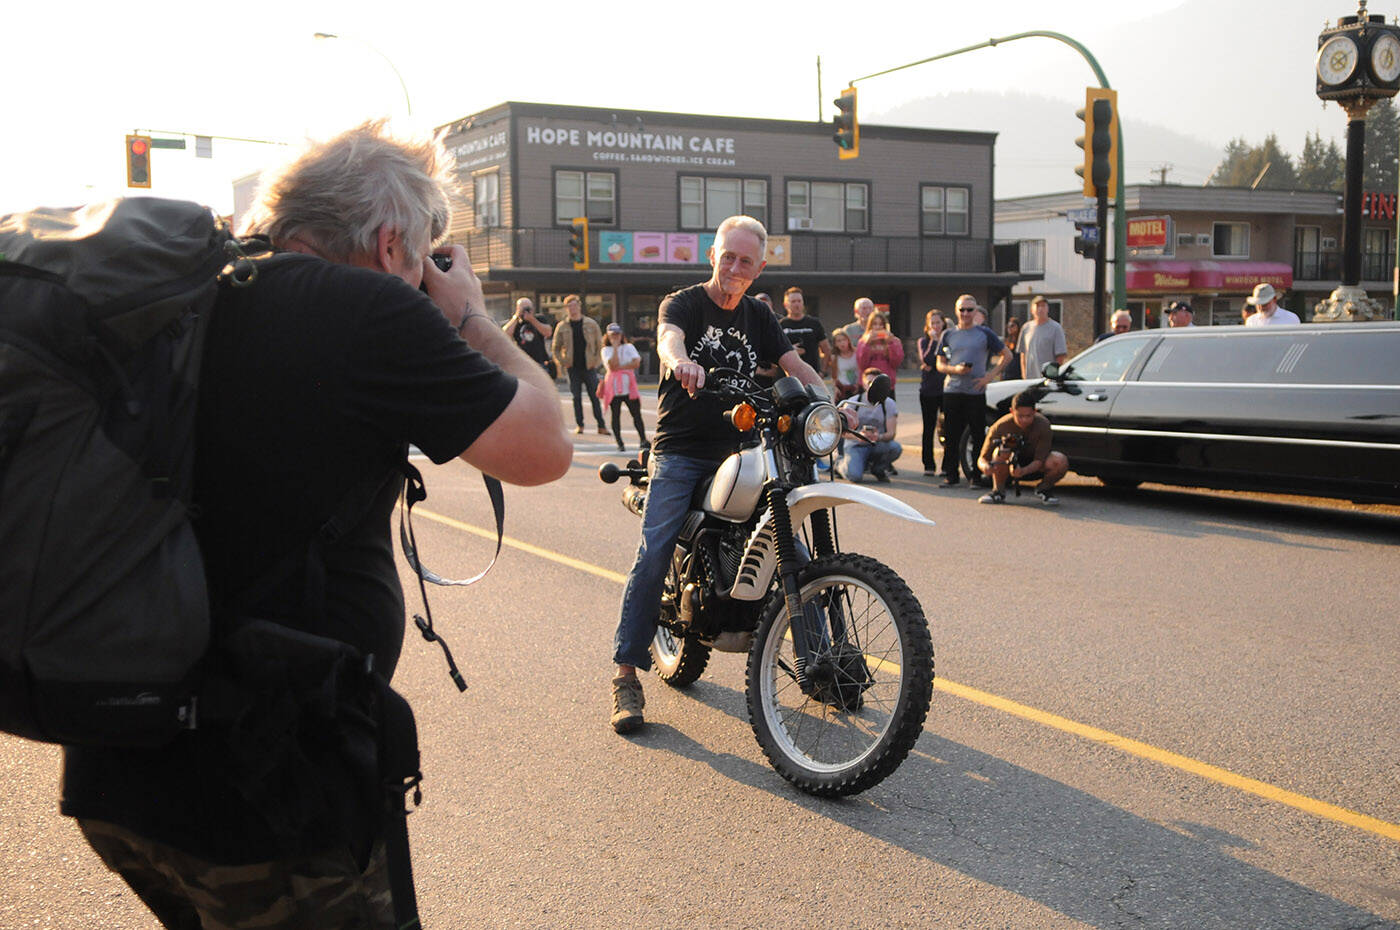 Jacob Rupp with Stunts Canada poses for a photo on Wallace Street in Hope during the Rambo First Blood 40th Anniversary celebrations on Saturday, Oct. 8, 2022. Rupp was the stuntman in the 1982 movie starring Sylvester Stallone. (Jenna Hauck/ Black Press Media)